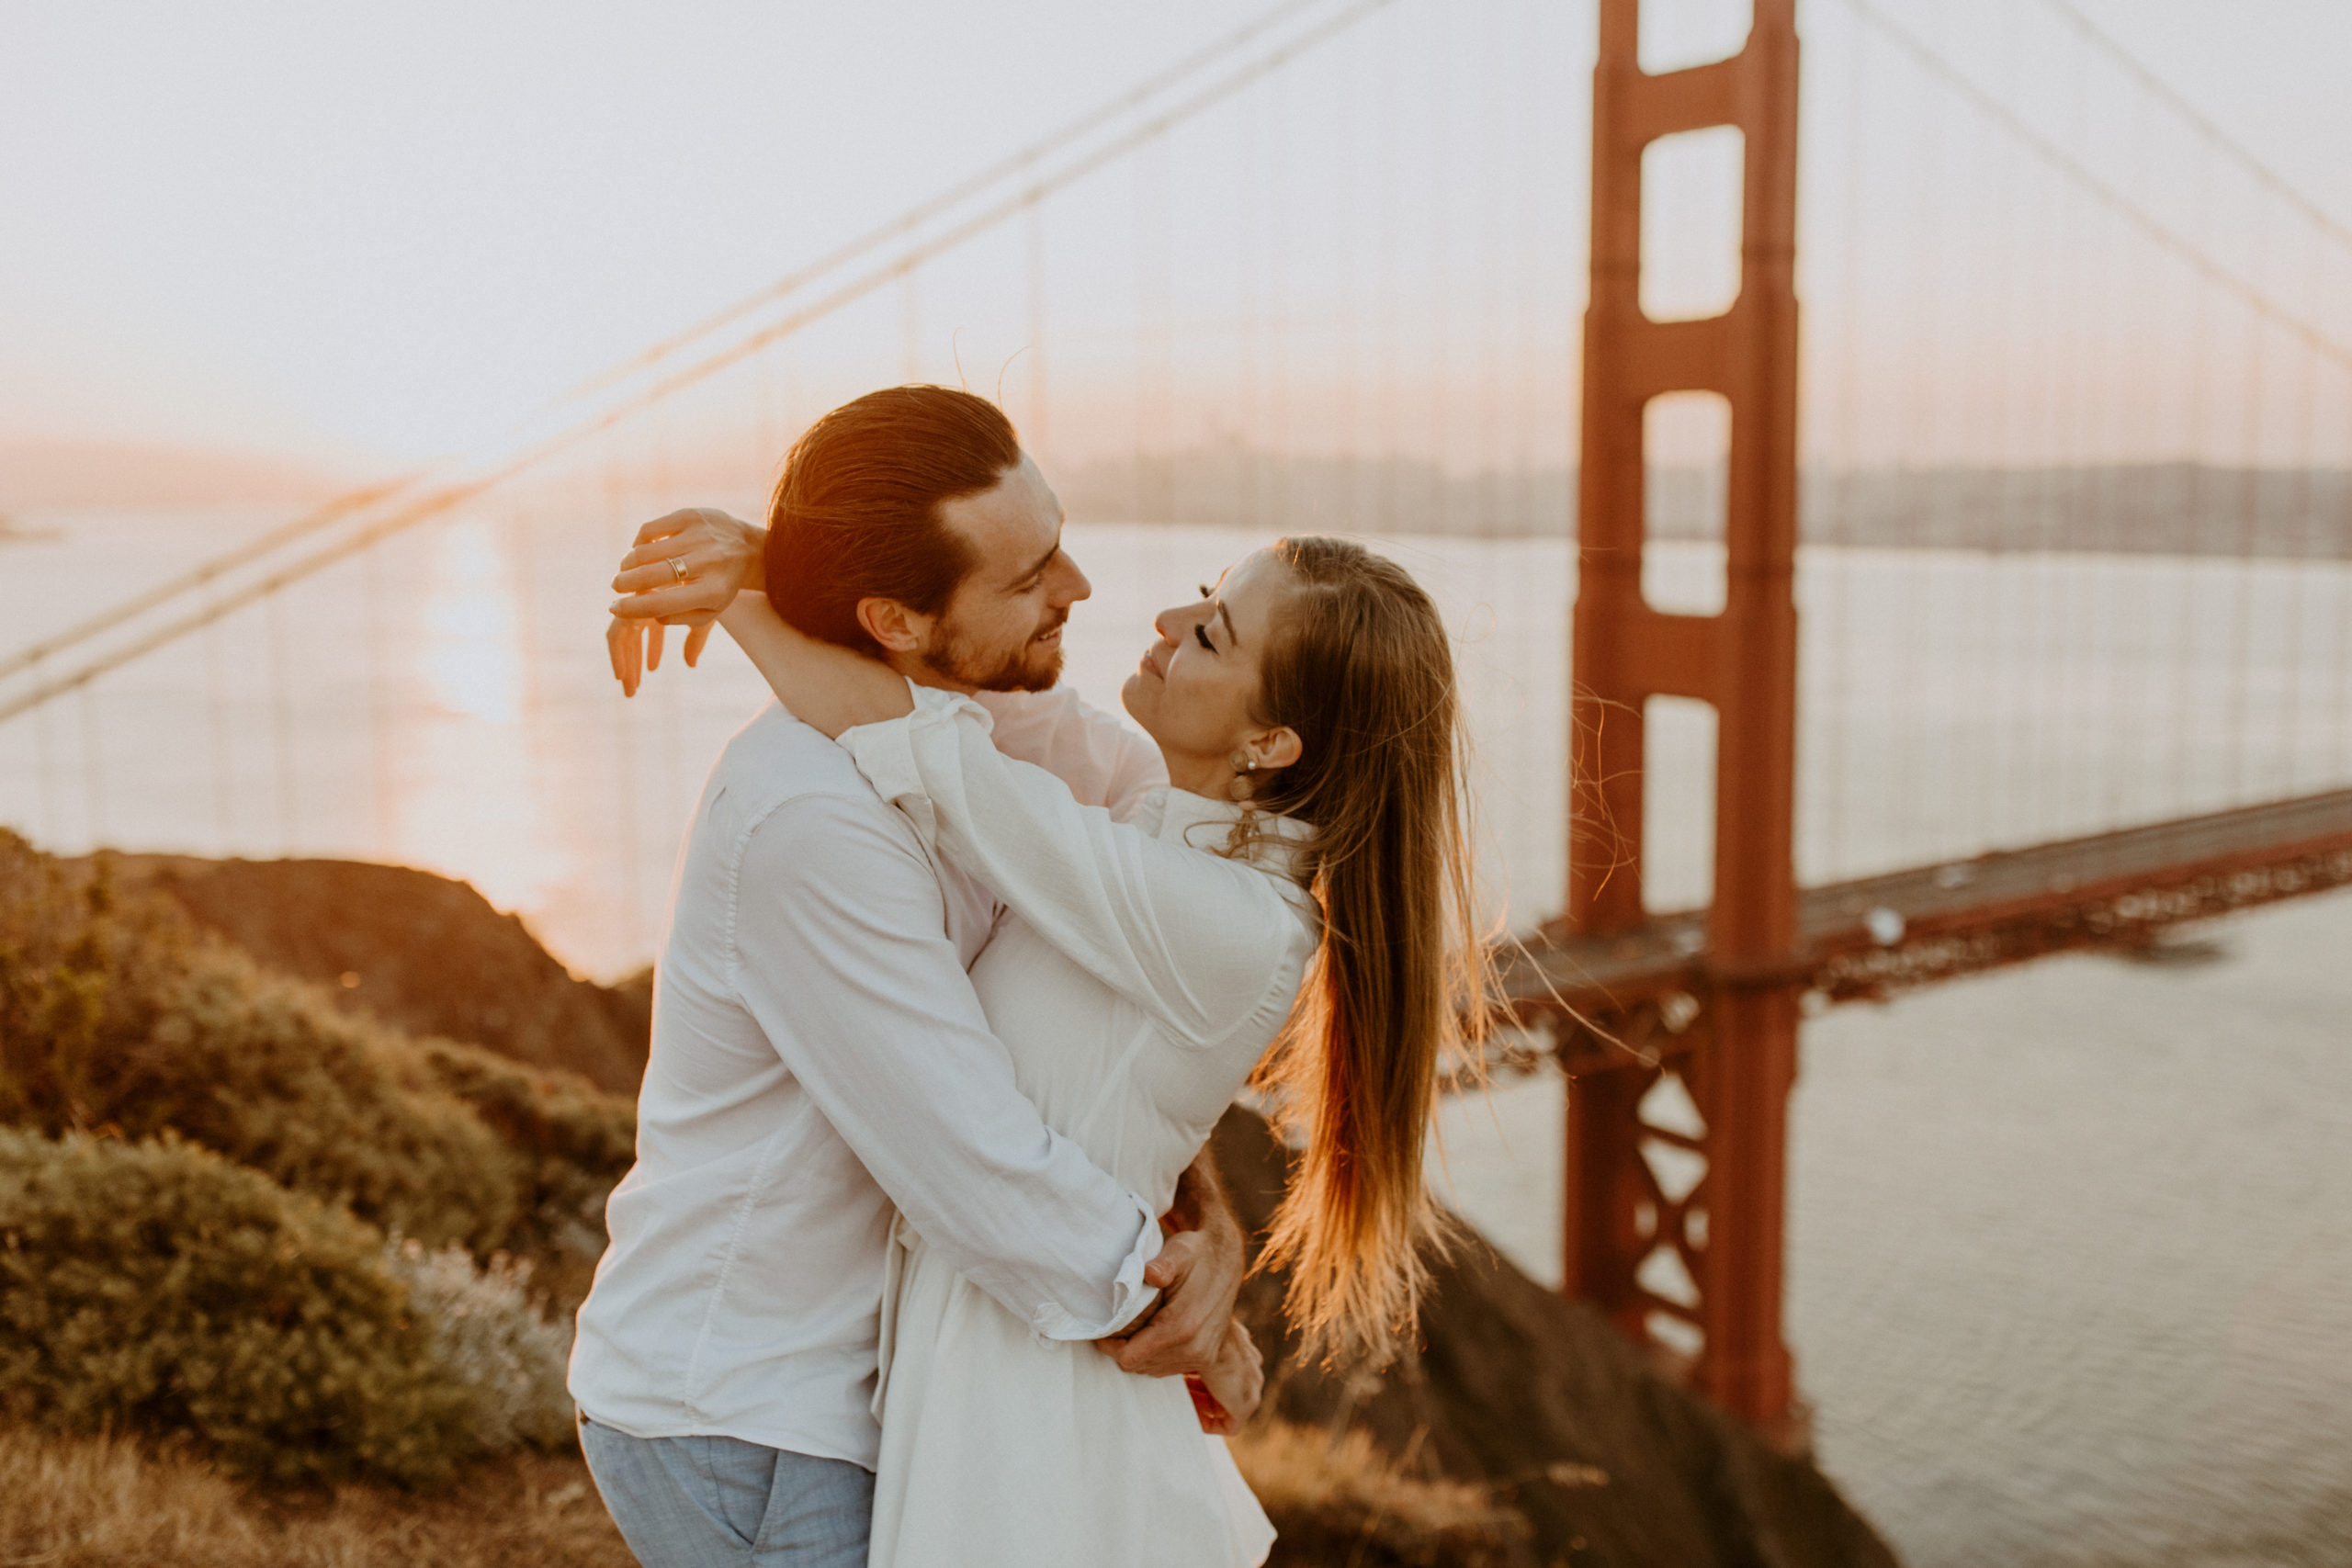 the couple wrapping their arms around each other at the Golden Gate Bridge in San Francisco